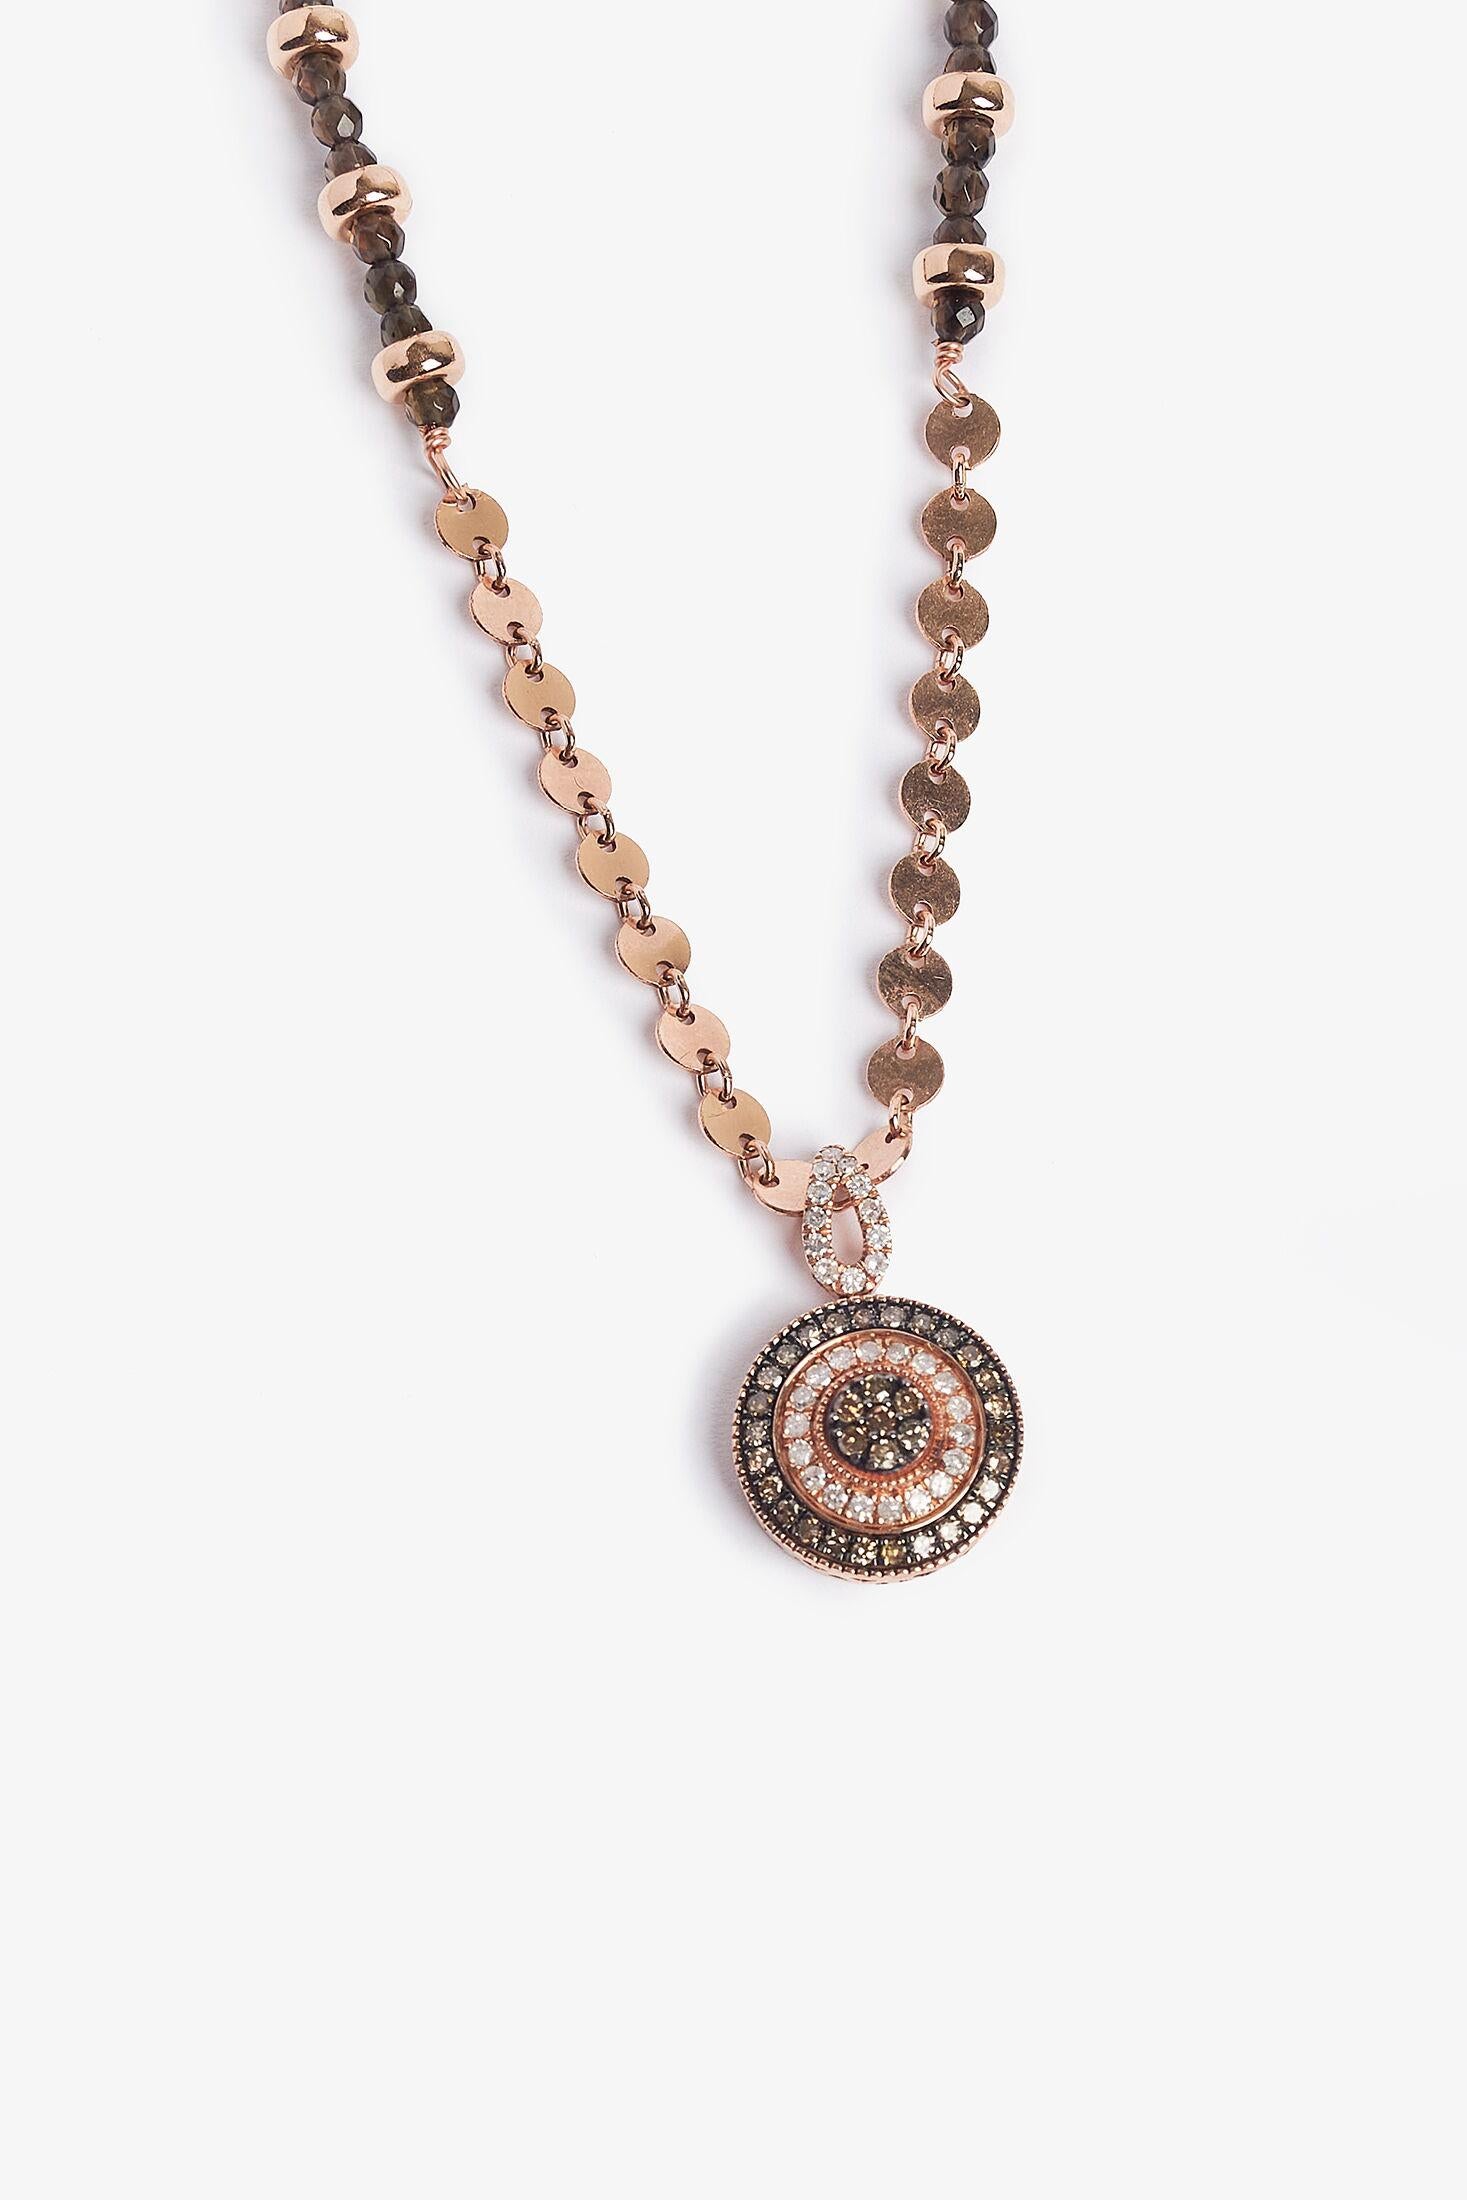 Single Cut Brilliance Brown and White Diamond Rose Gold Necklace For Sale